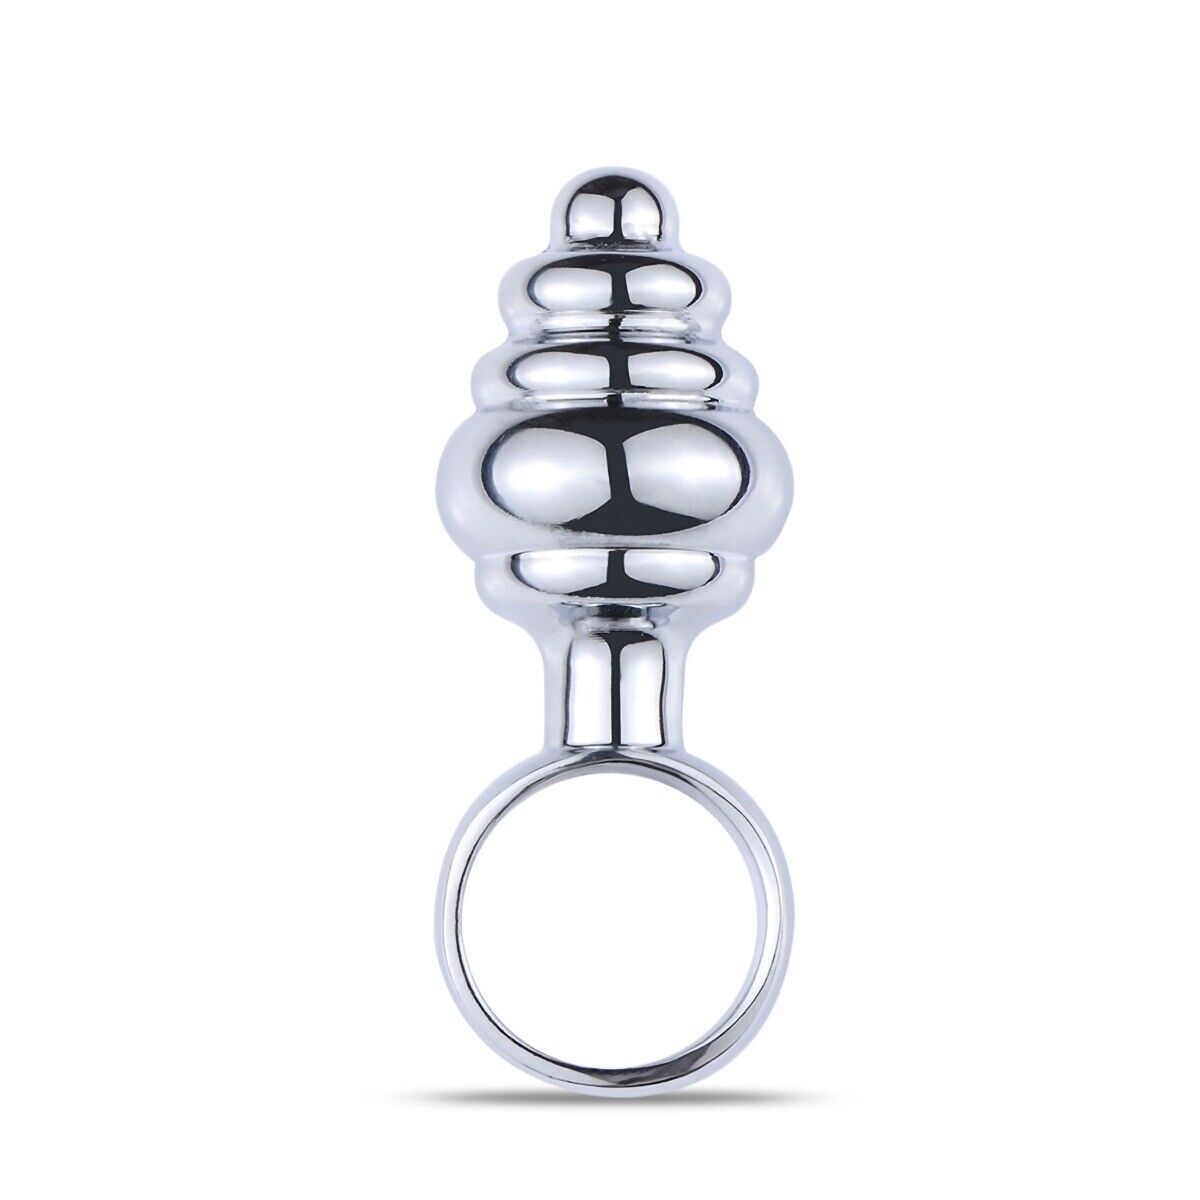 Stainless Steel Mini Anal Trainer Butt Plug Sex Toys for Men Women Couples